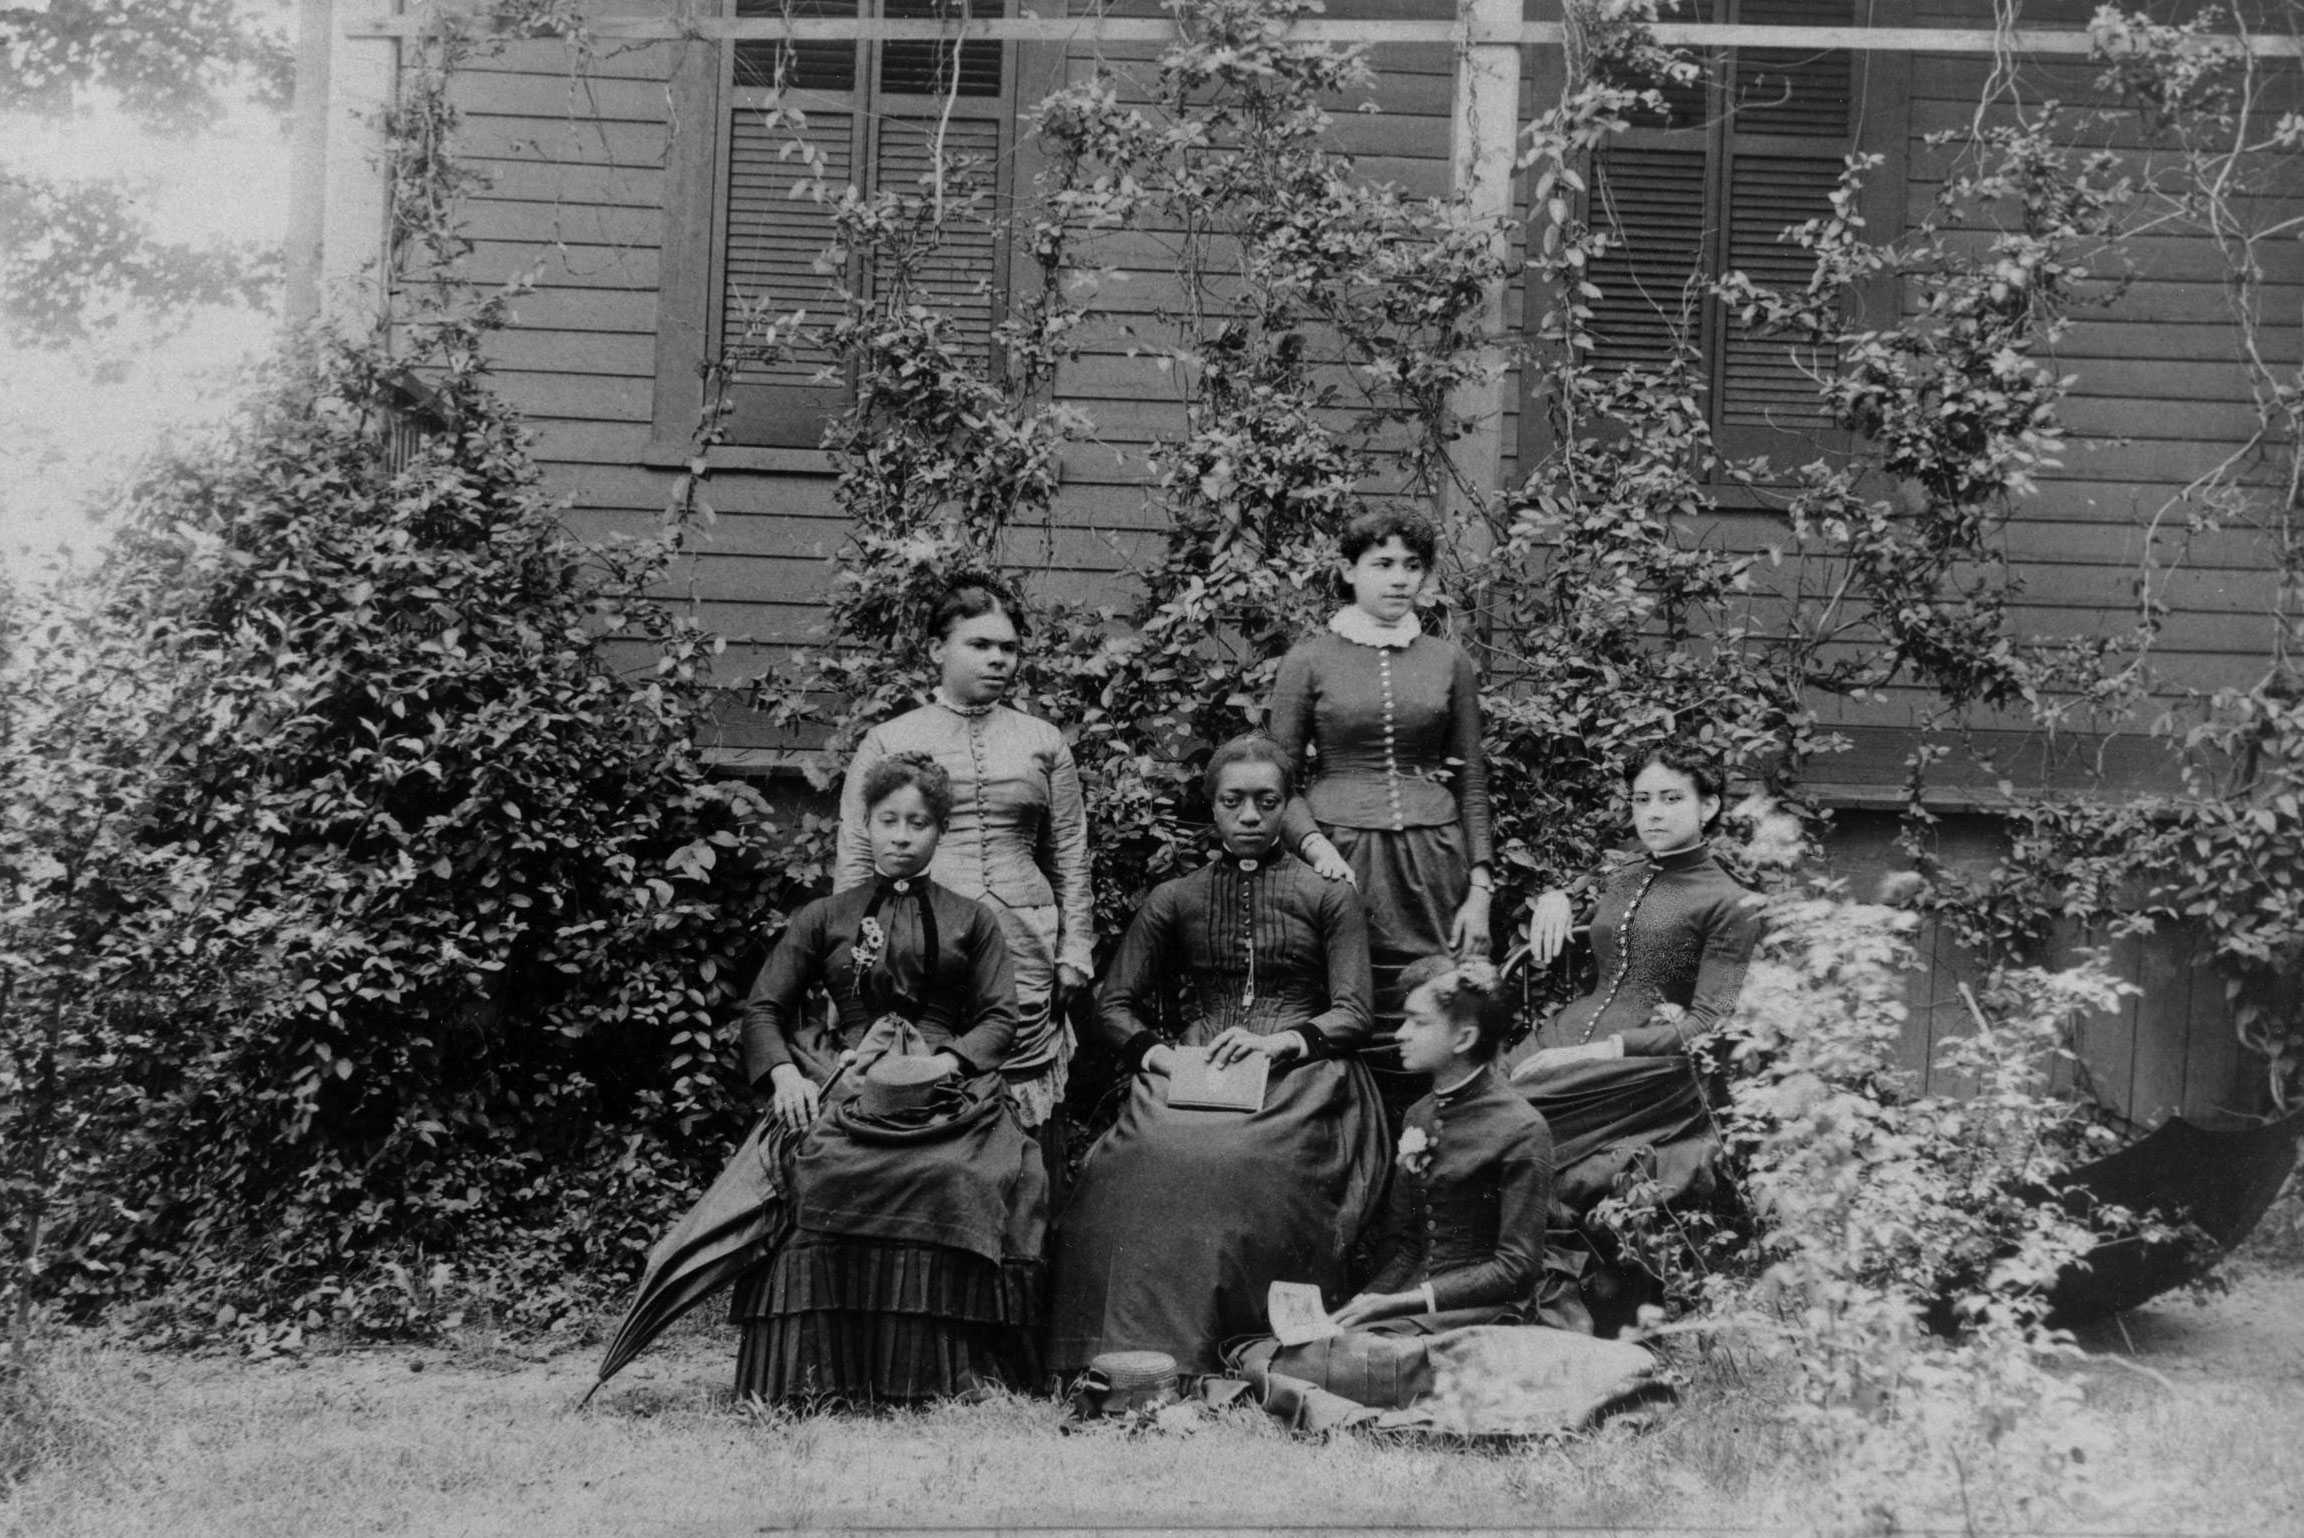 A black and white photo of 6 students sitting in front of a schoolhouse. It is labeled 'Graduates of 1887'.